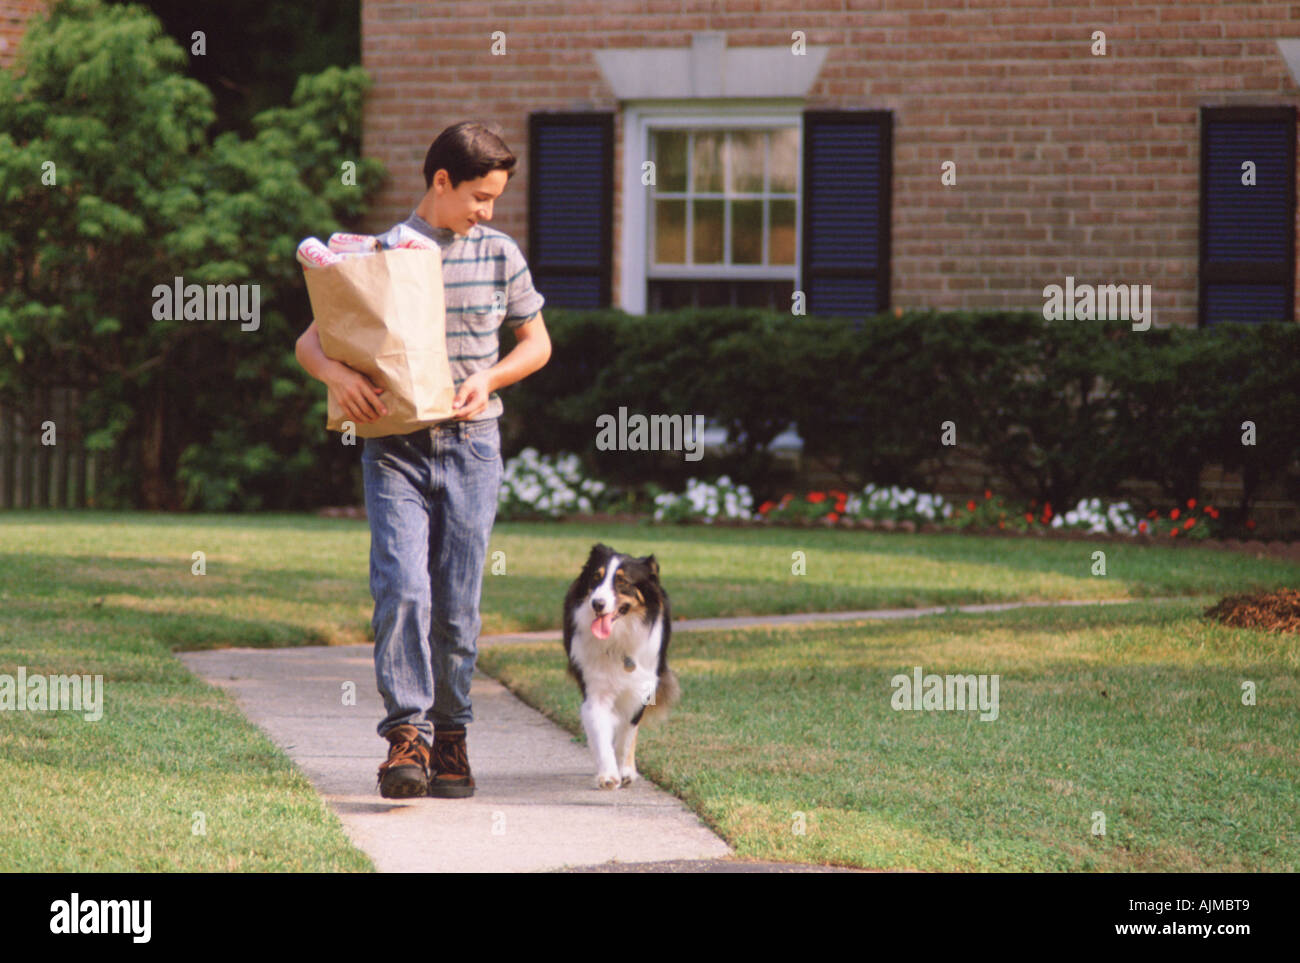 Boy carries groceries with his dog walking alongside him Stock Photo